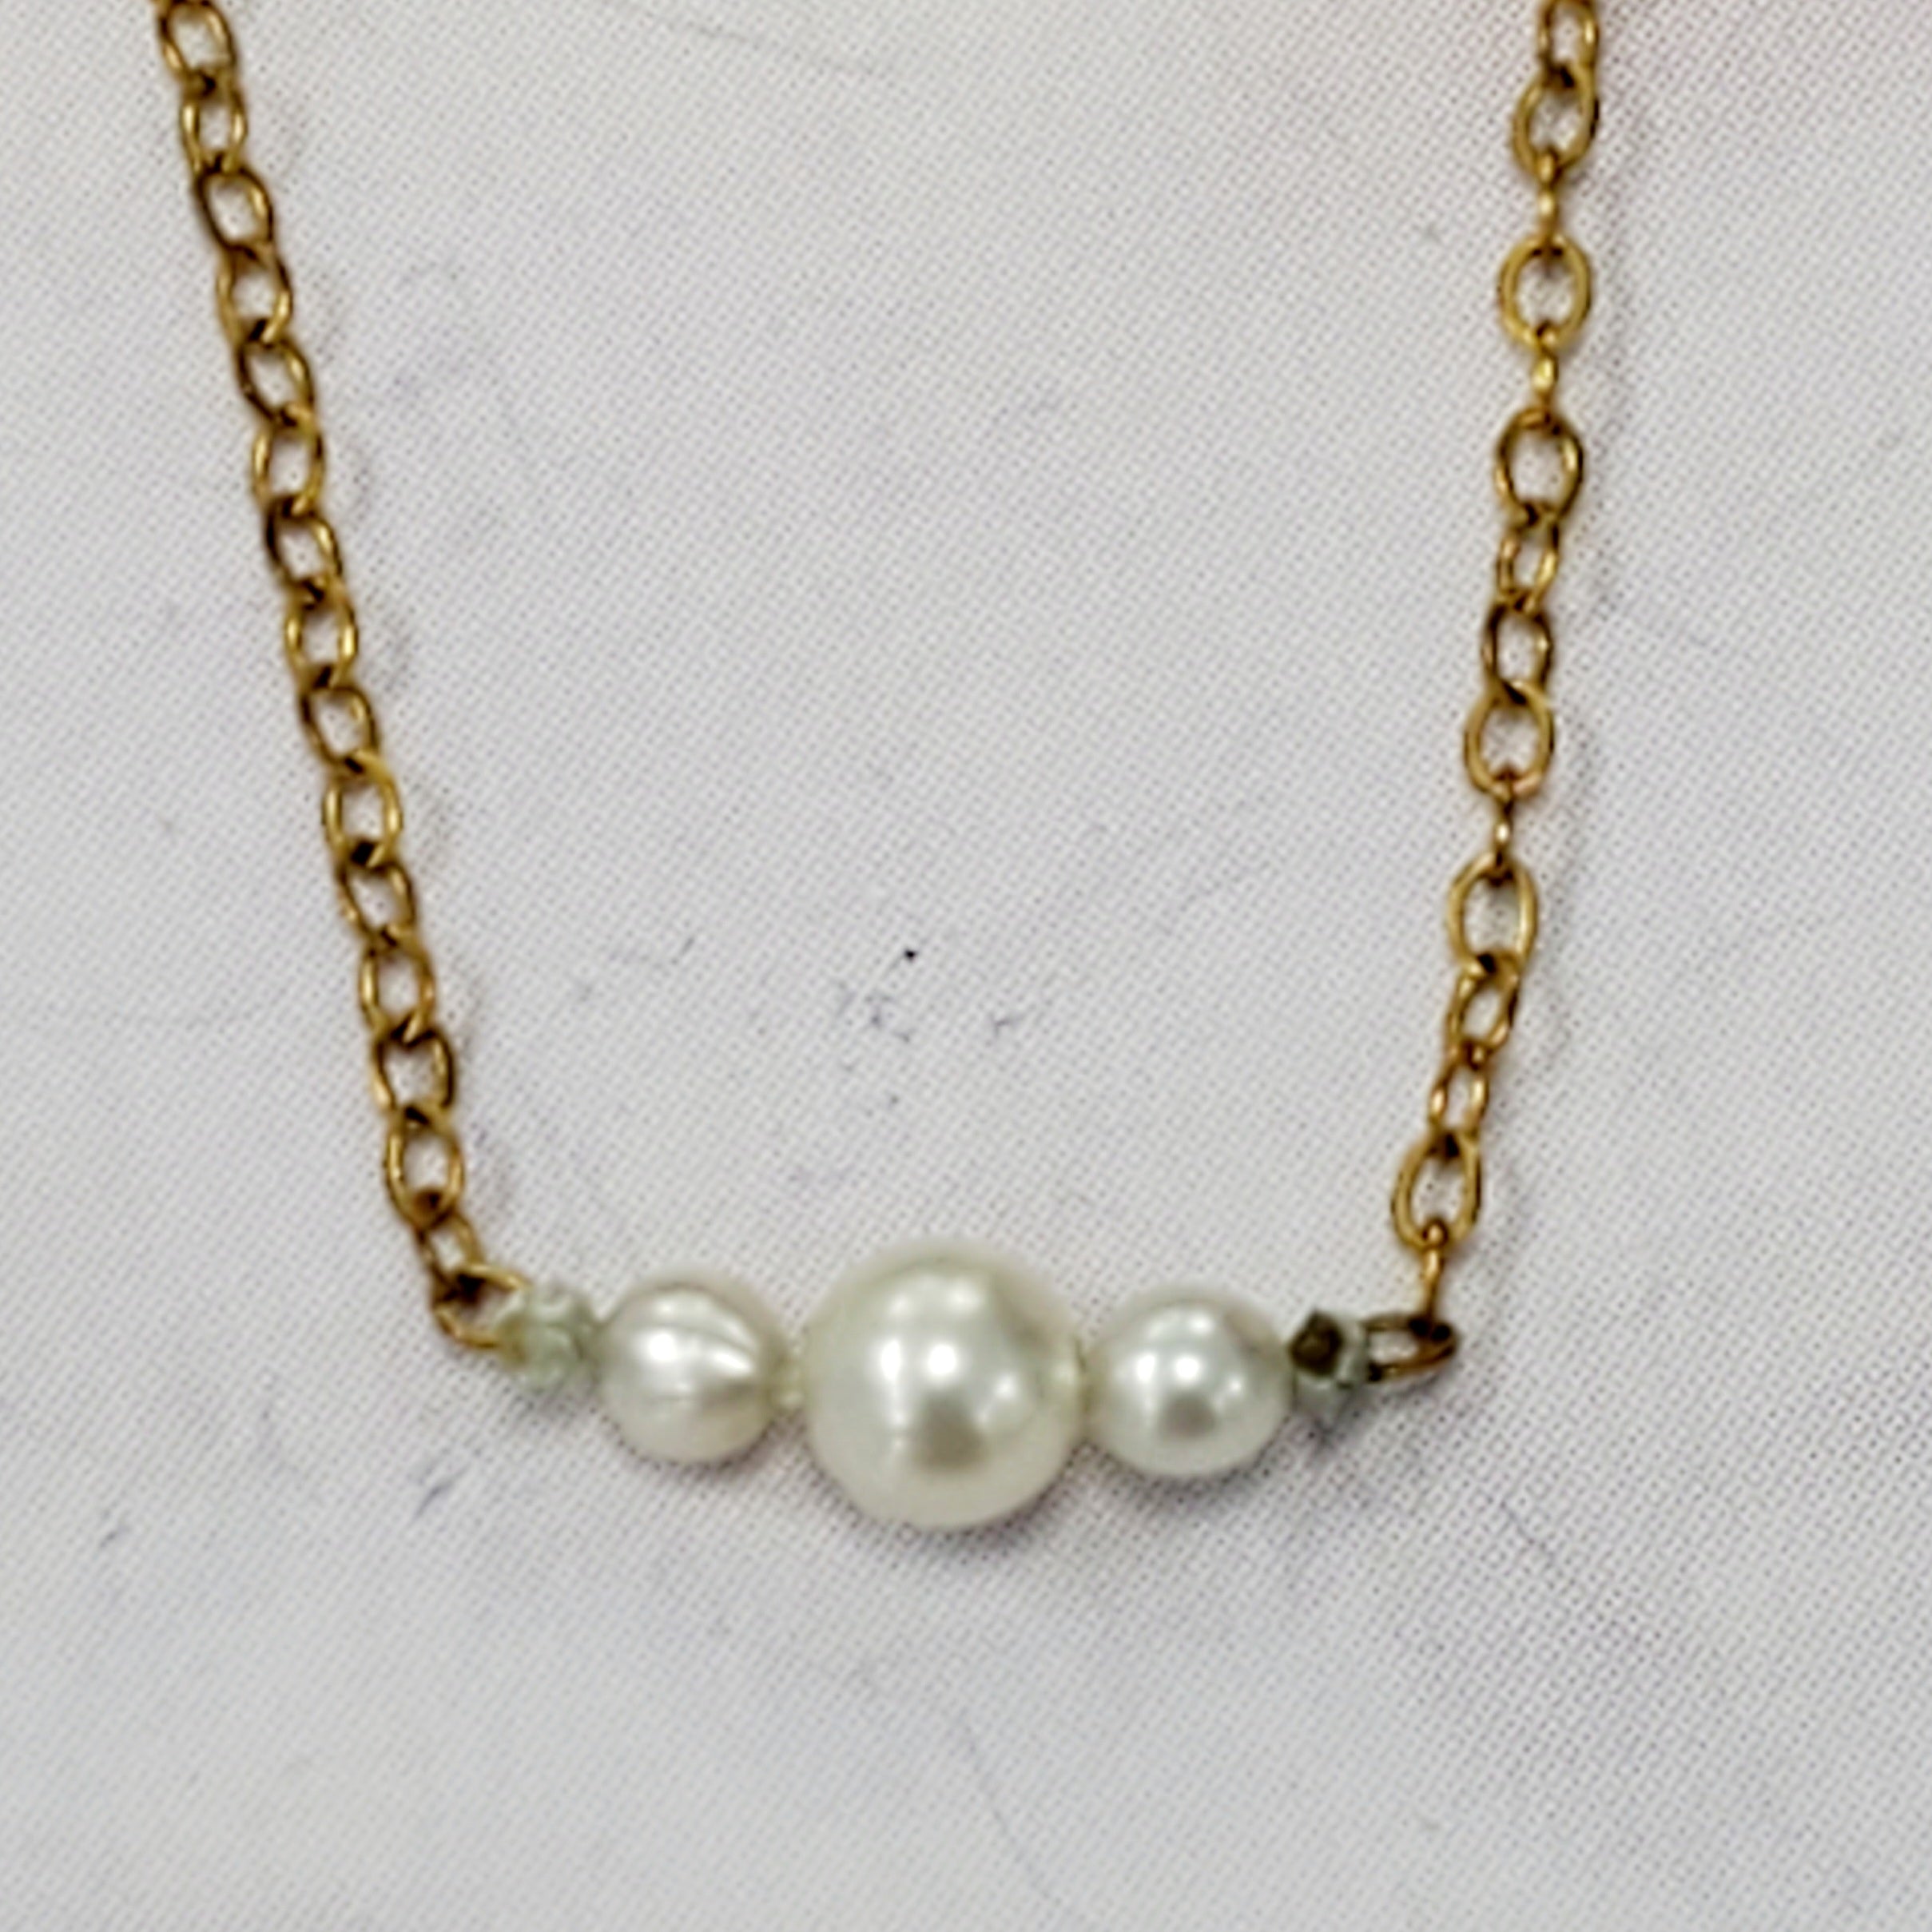 add-a-pearl necklace